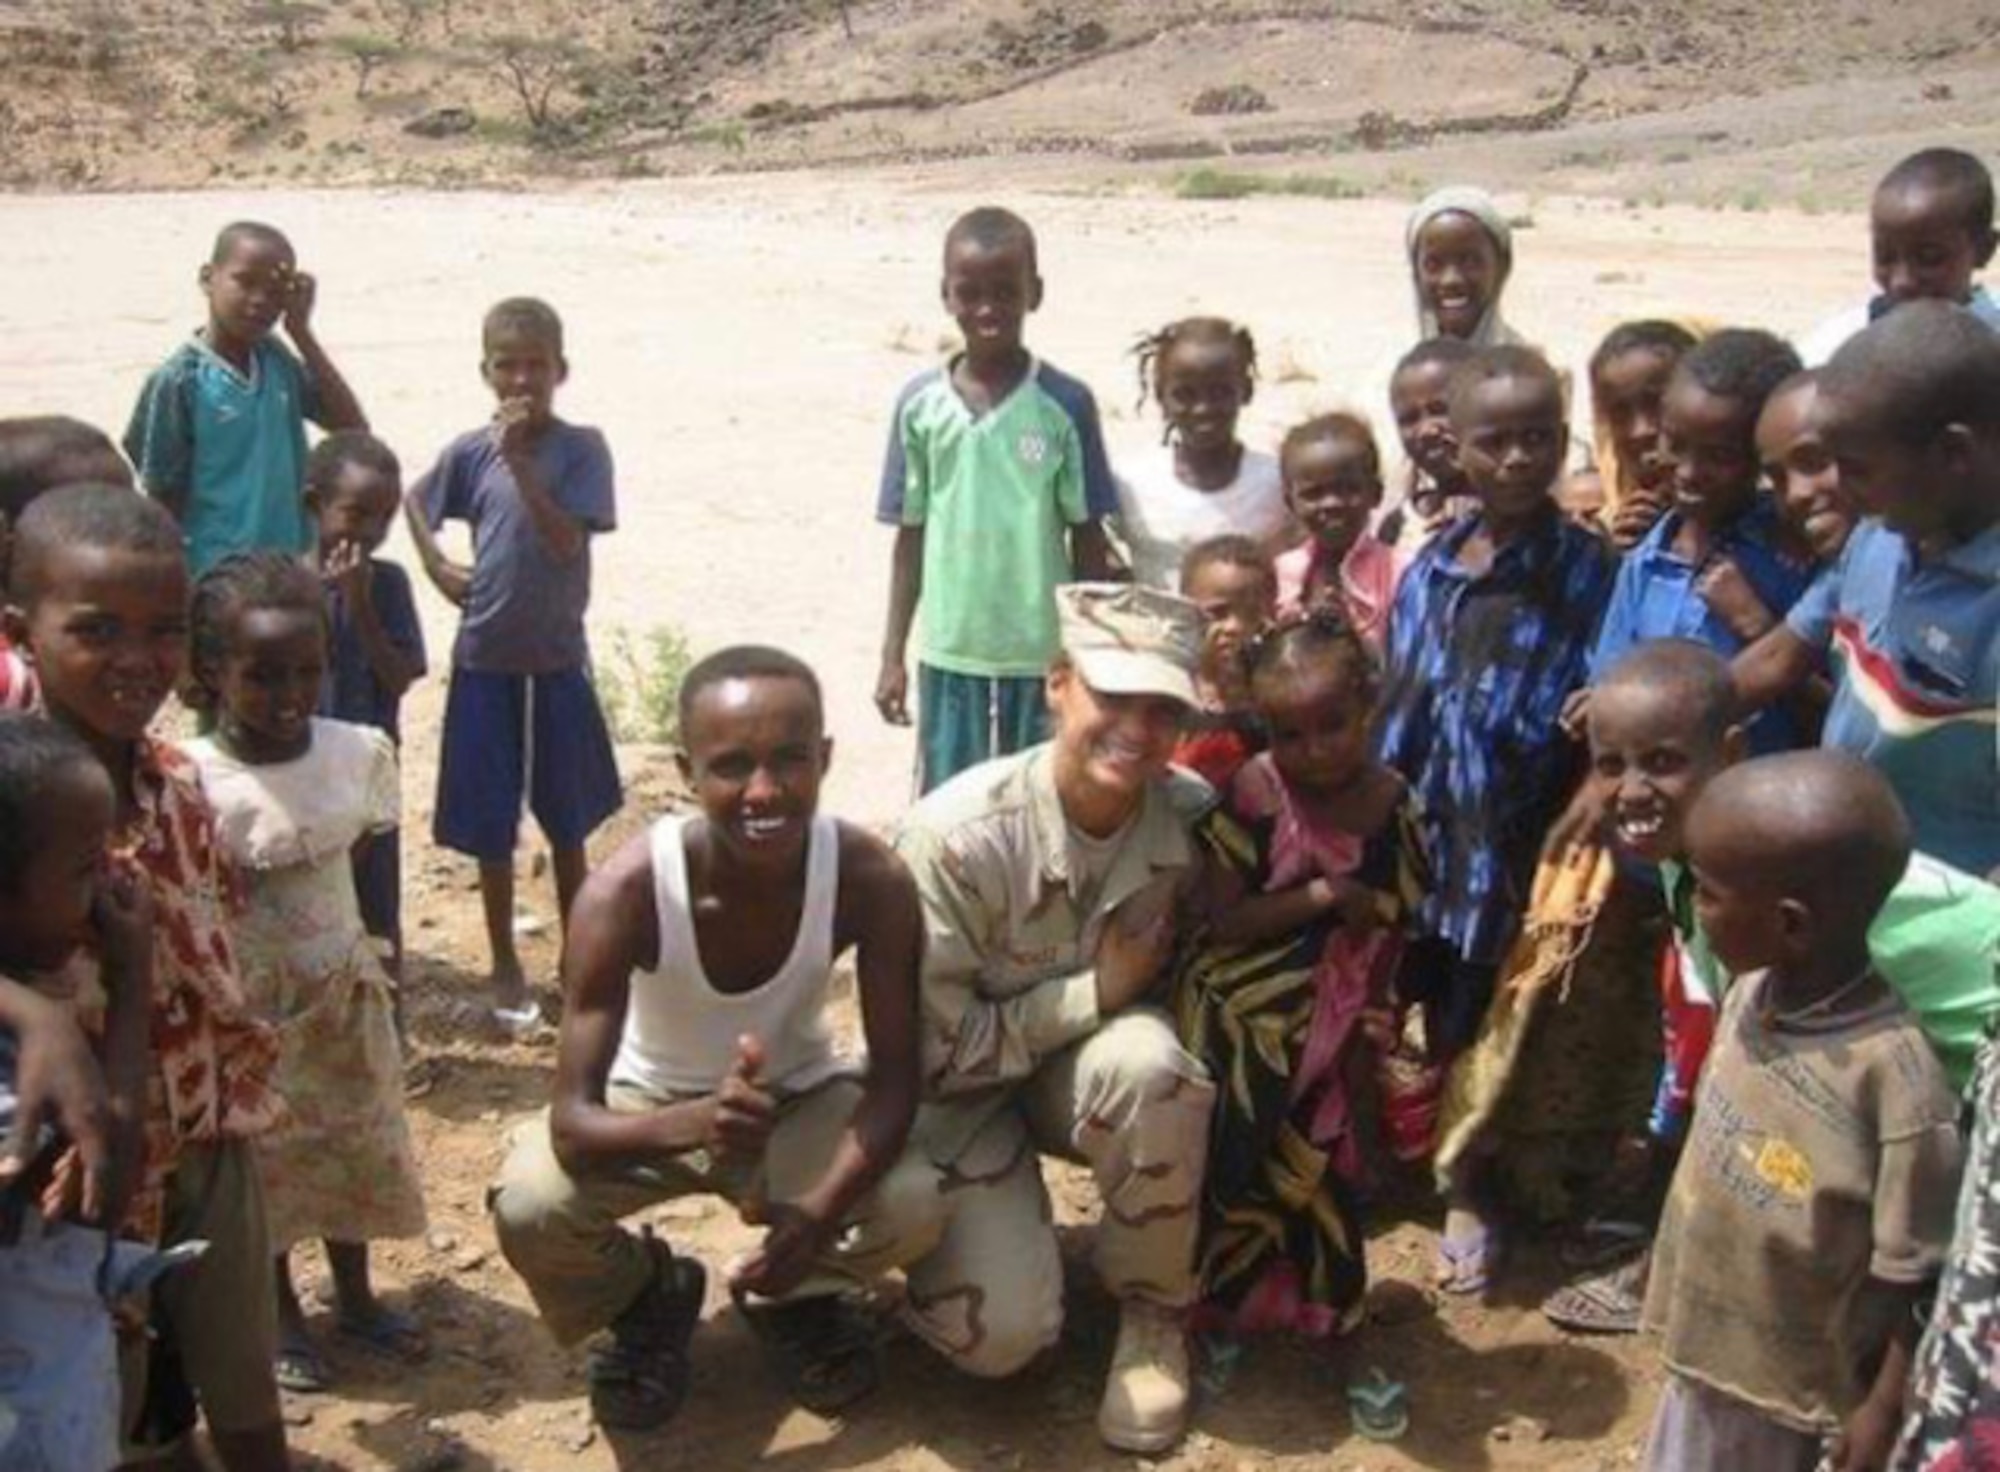 U.S. Air Force retired Tech. Sgt. Daylena Ricks, photojournalist, poses for a picture with local nationals while on a humanitarian mission in Addis, Ethiopia in 2007.